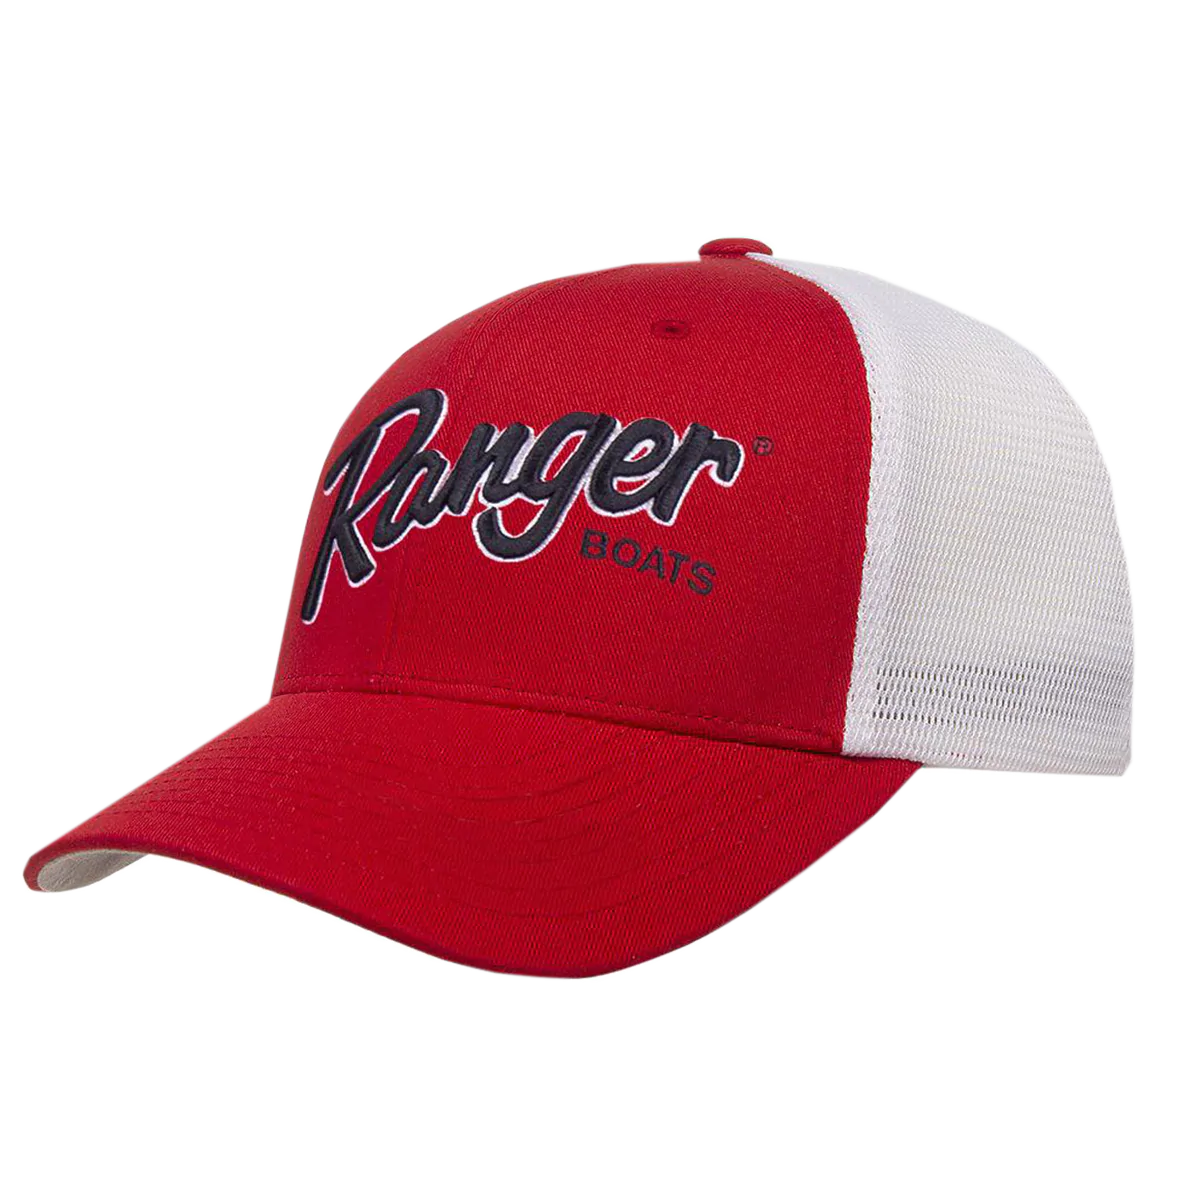 Ranger Authentic Hat - Red/White